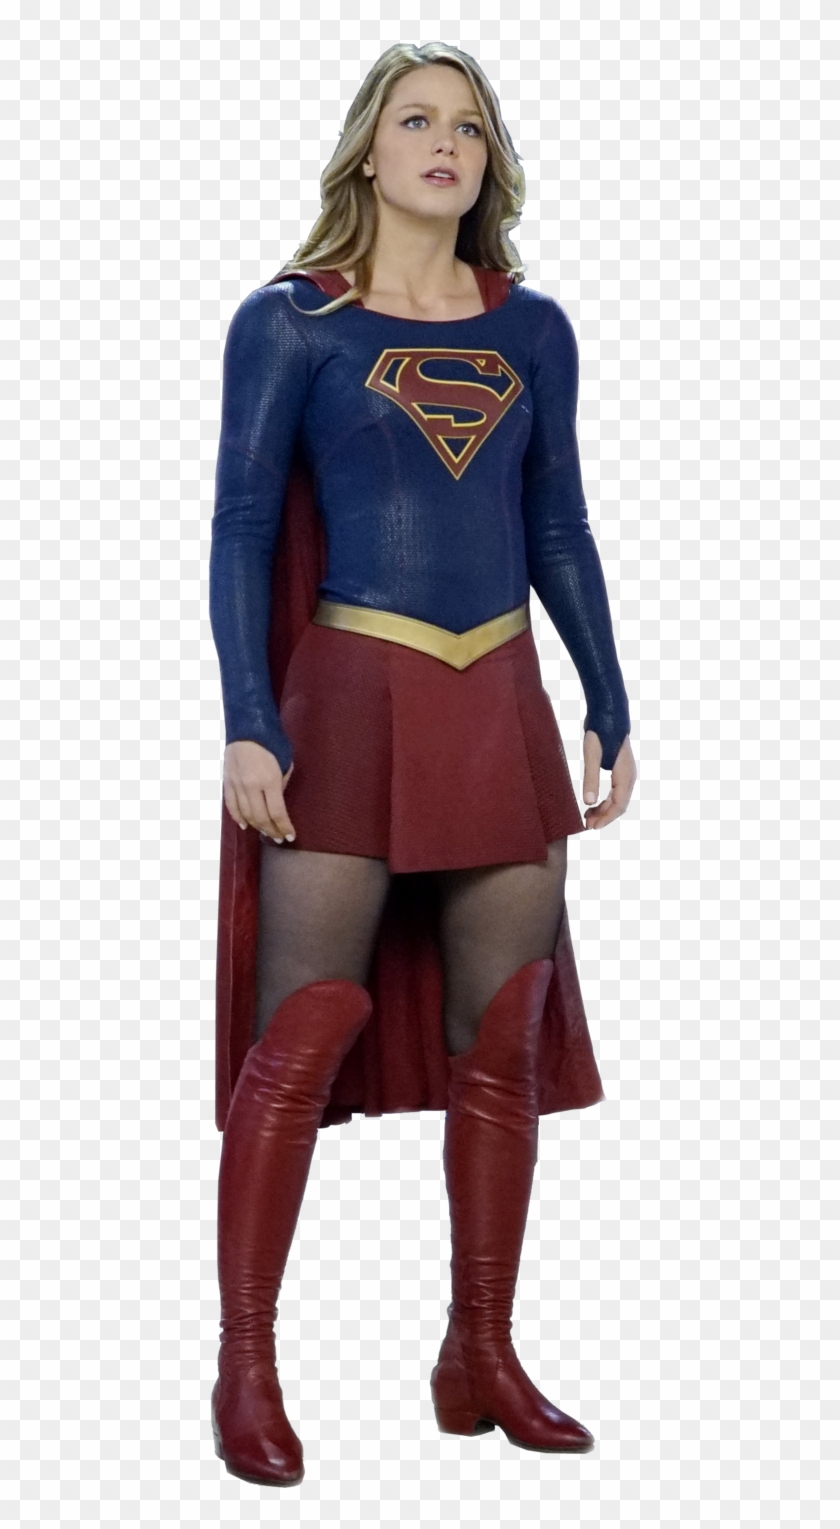 Supergirl By Buffy2ville - Supergirl Cw Png Clipart #963757